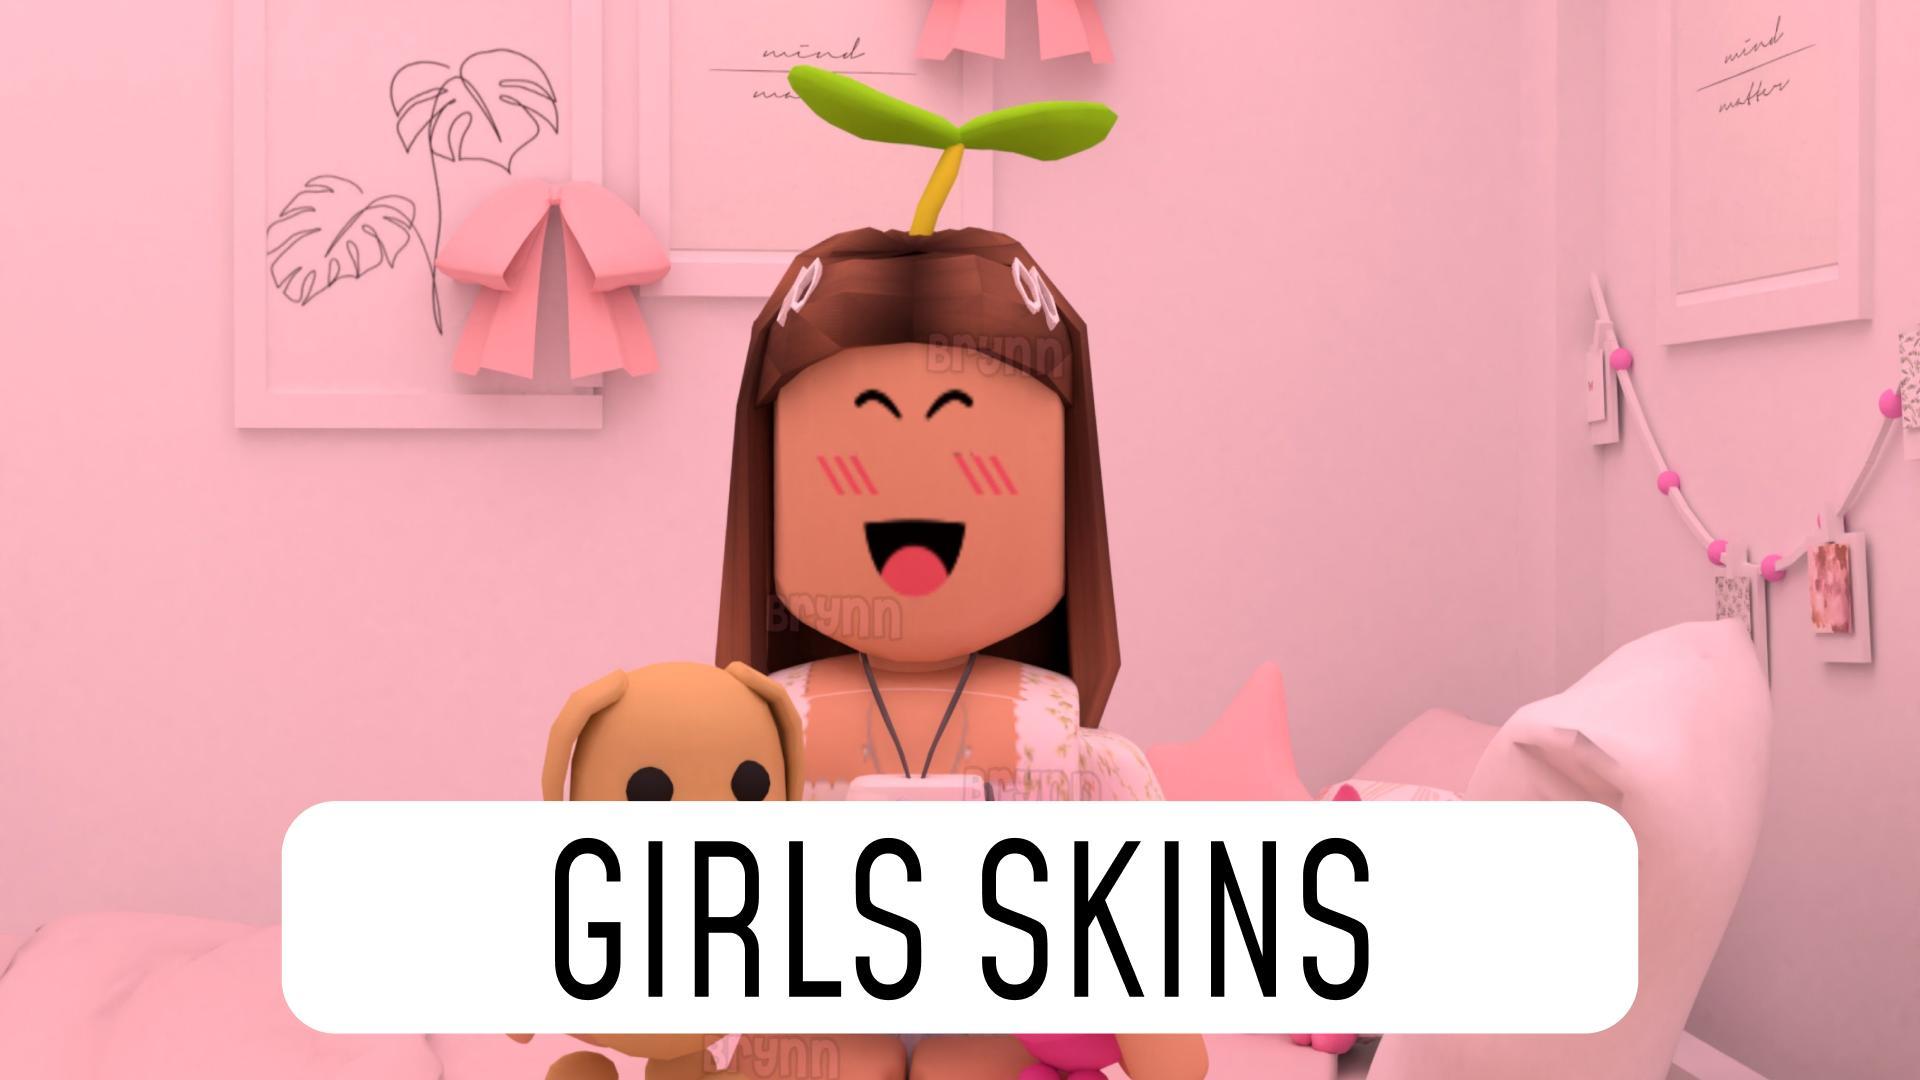 Download Girl skins for roblox android on PC